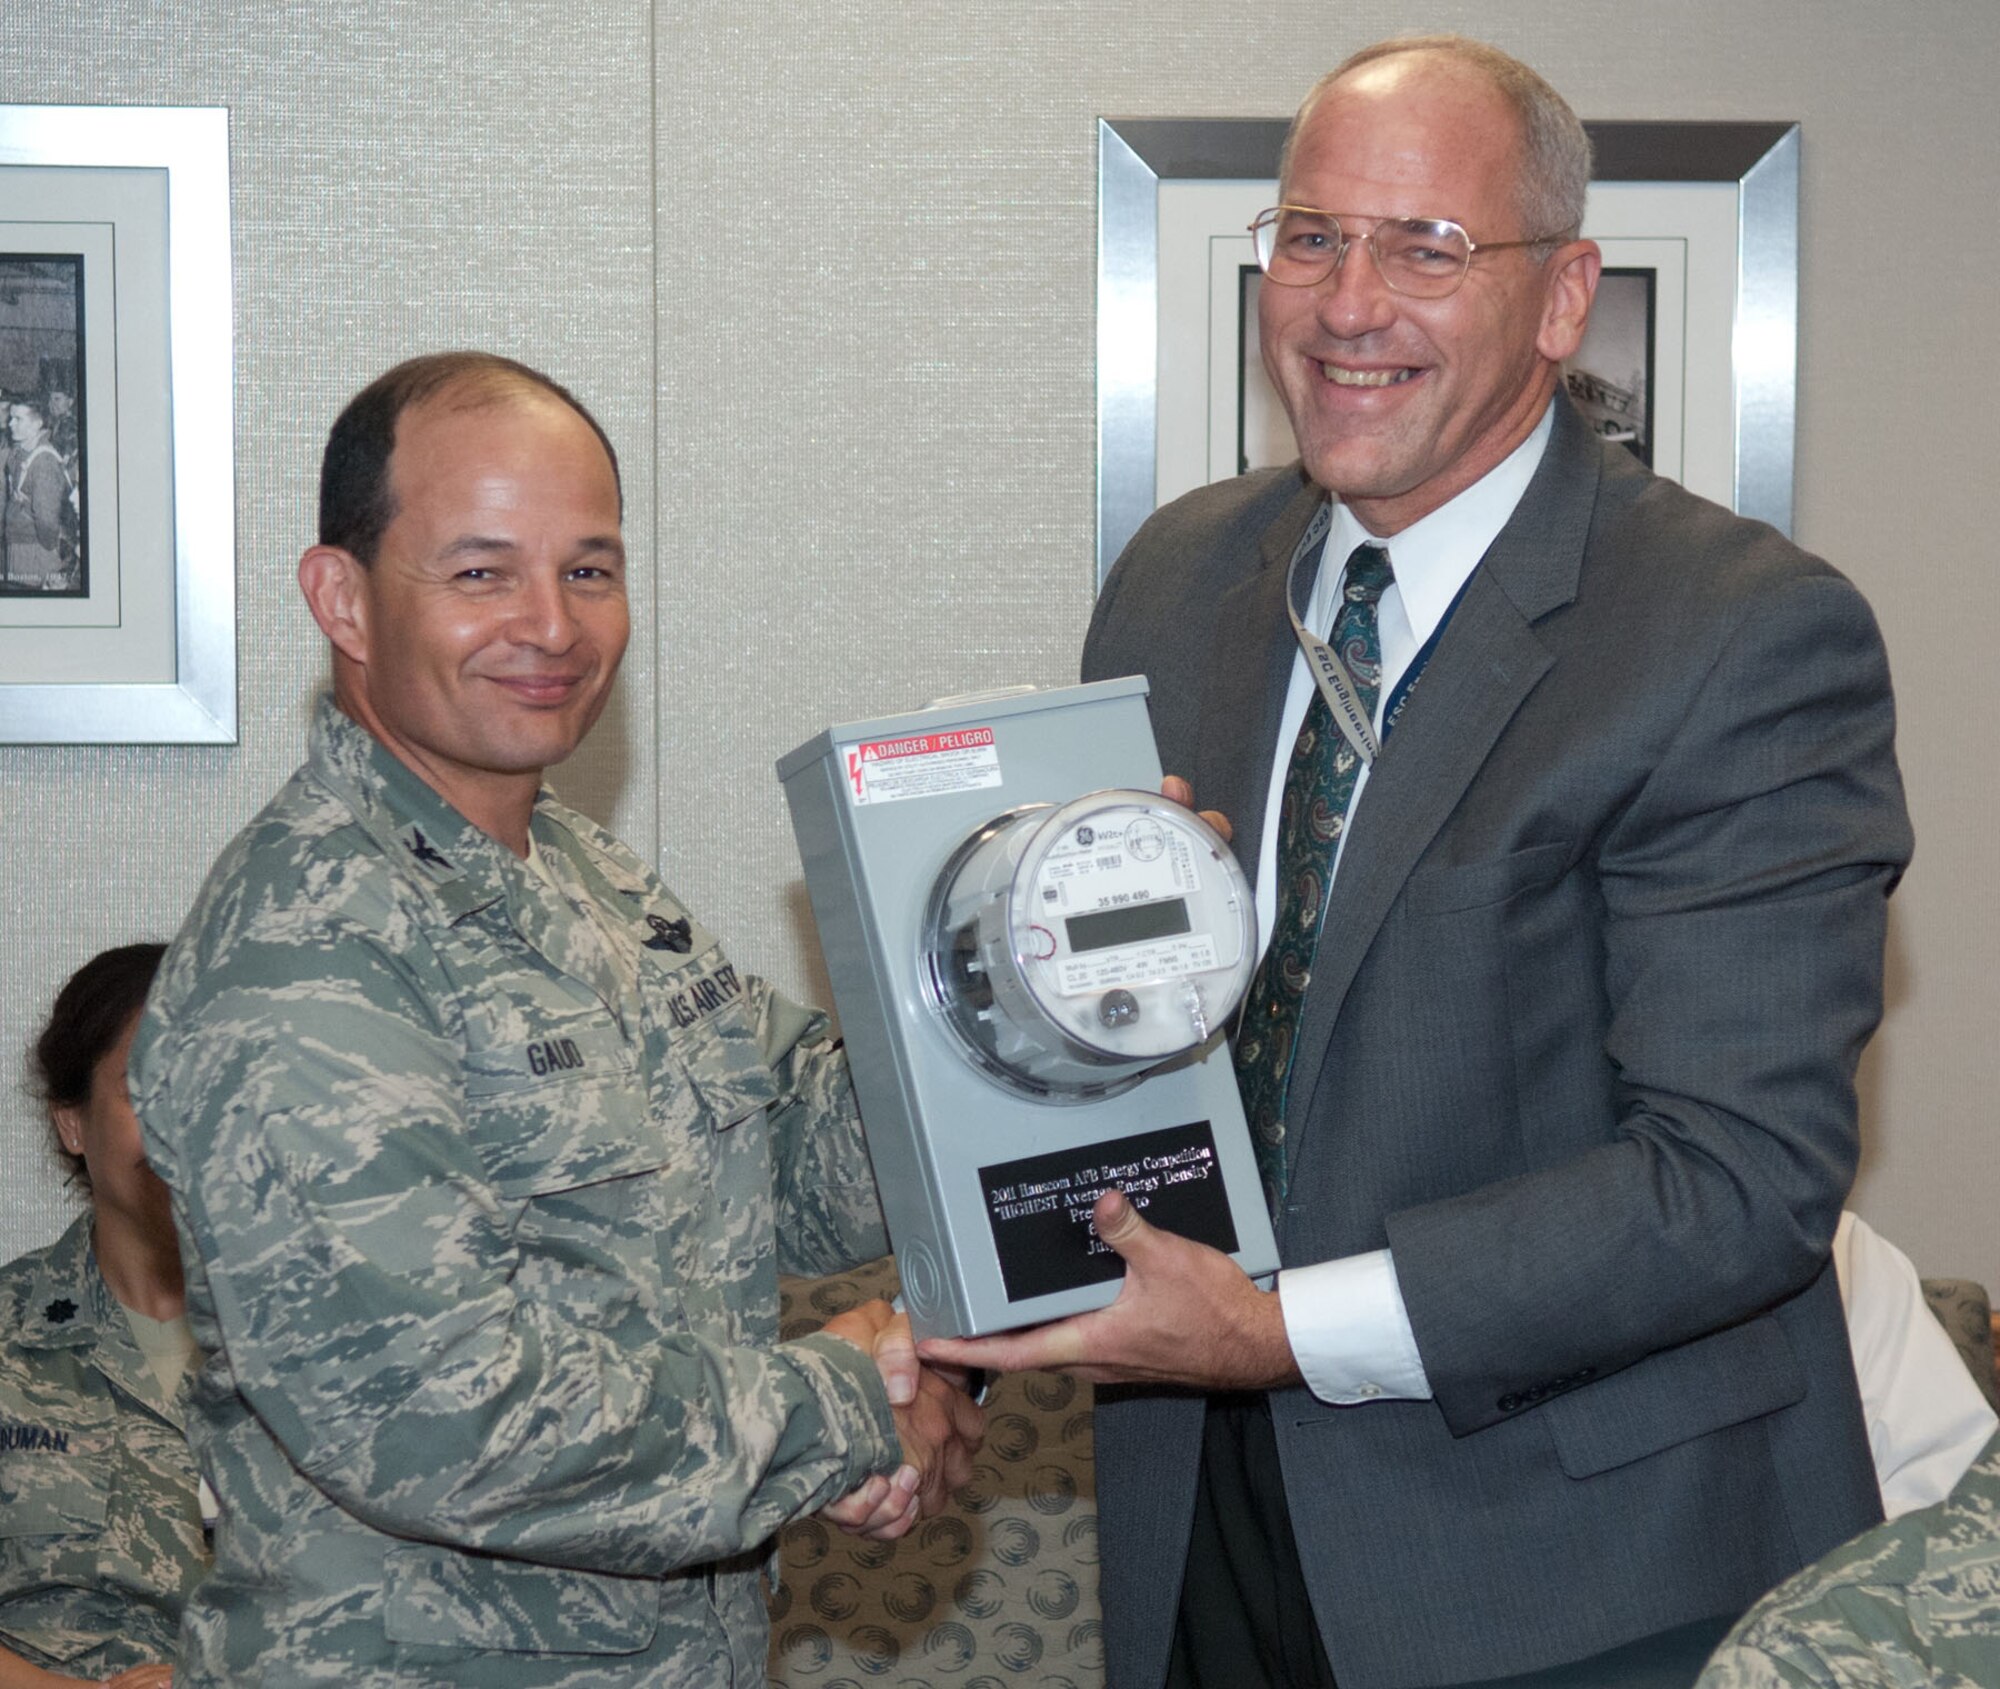 HANSCOM AIR FORCE BASE, Mass. – Col. Juan Gaud (left), 66th Air Base Group deputy commander, accepts an award for Highest Average Energy Intensity from Tom Schluckebier, base civil engineer, during the Electronic Systems Center staff meeting July 21. Although the air base group recorded the highest energy usage across the base, they were also awarded as the “Biggest Loser” for lowering their energy consumption during the Hanscom Energy Reduction Competition held from Jan. 1 to June 30, 2011. (U.S. Air Force photo by Rick Berry)